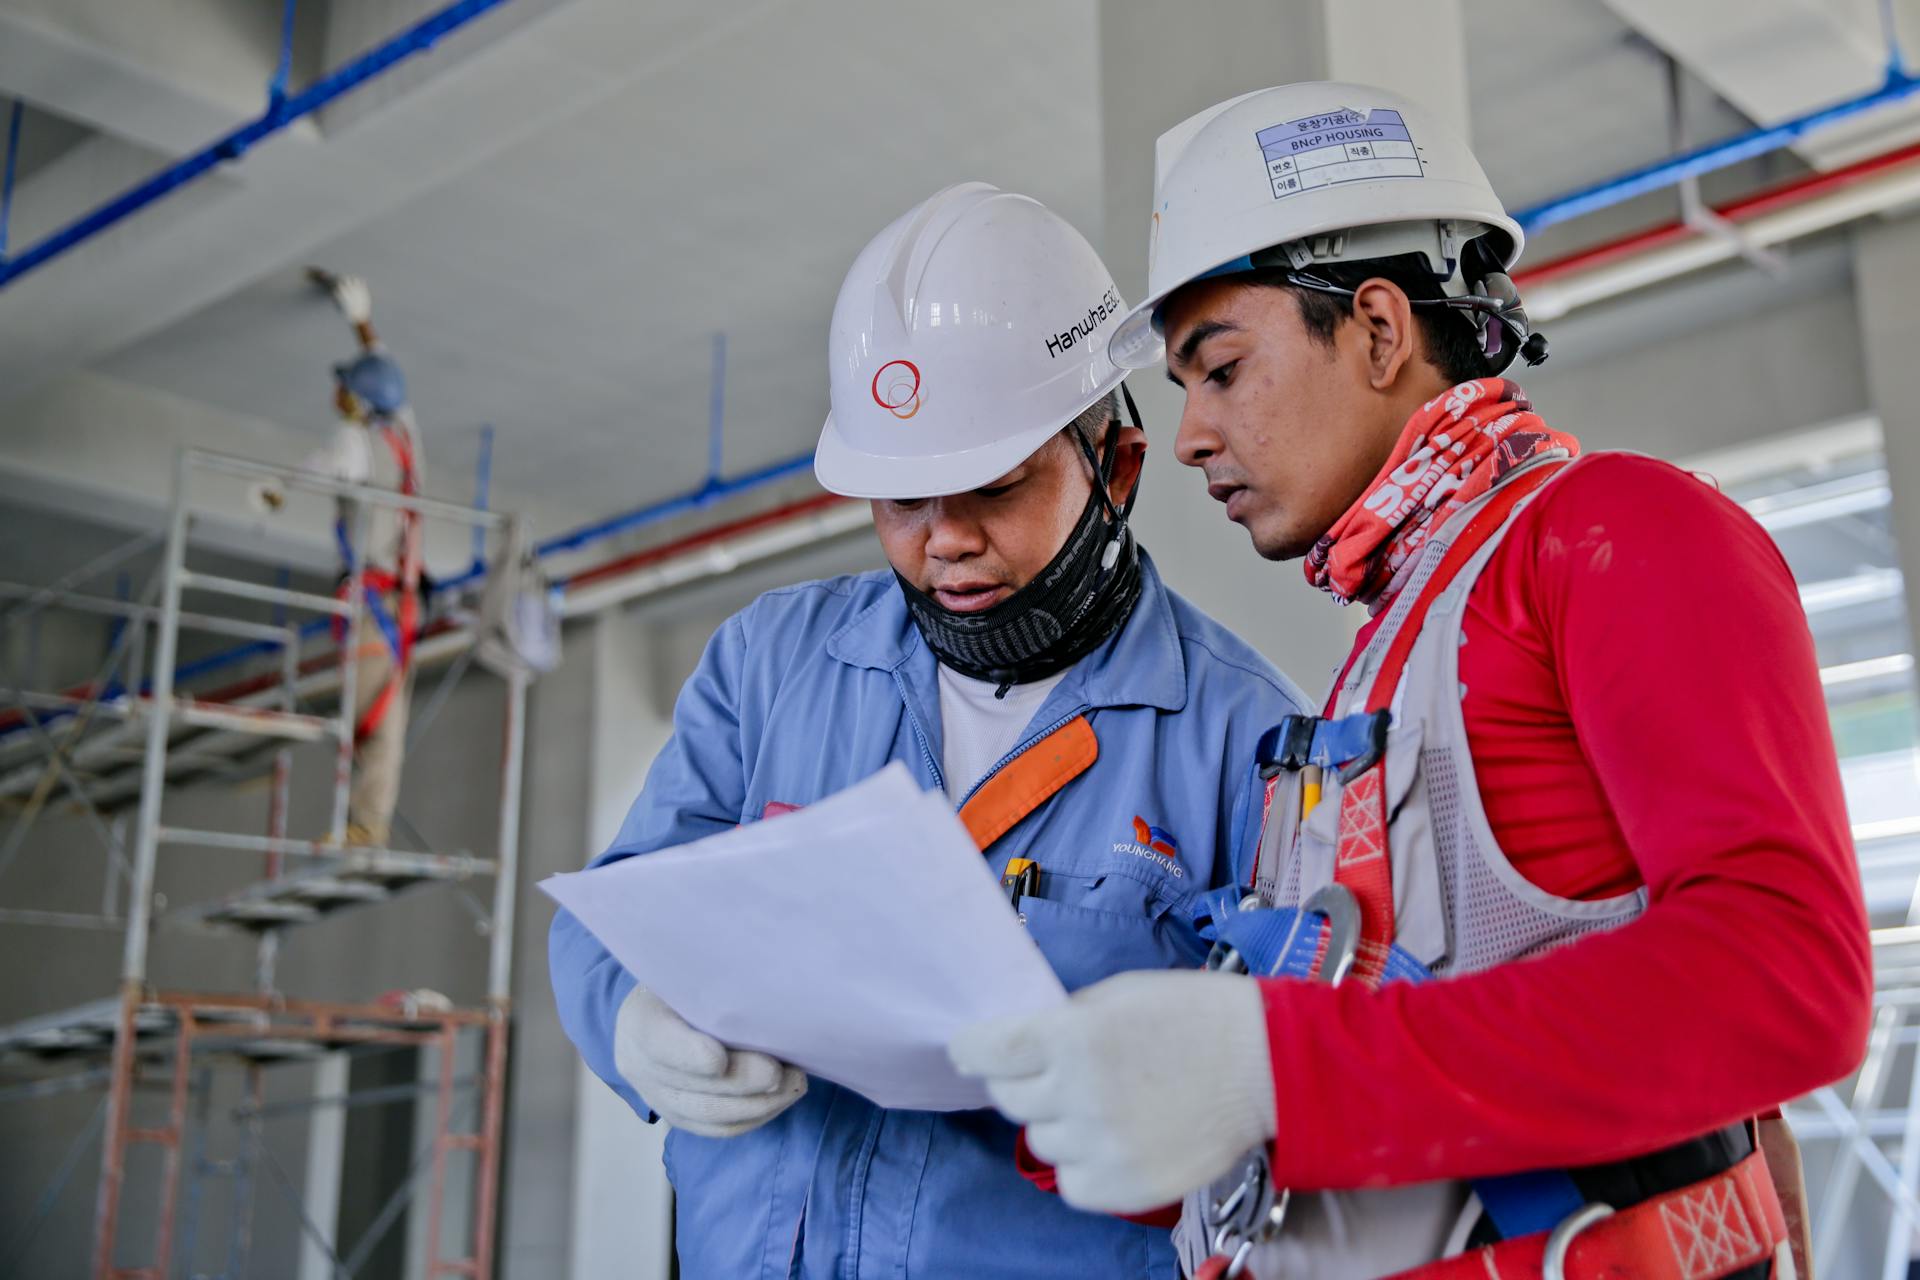 Enhancing On-Site Safety: 12 Essential Tools and Practices